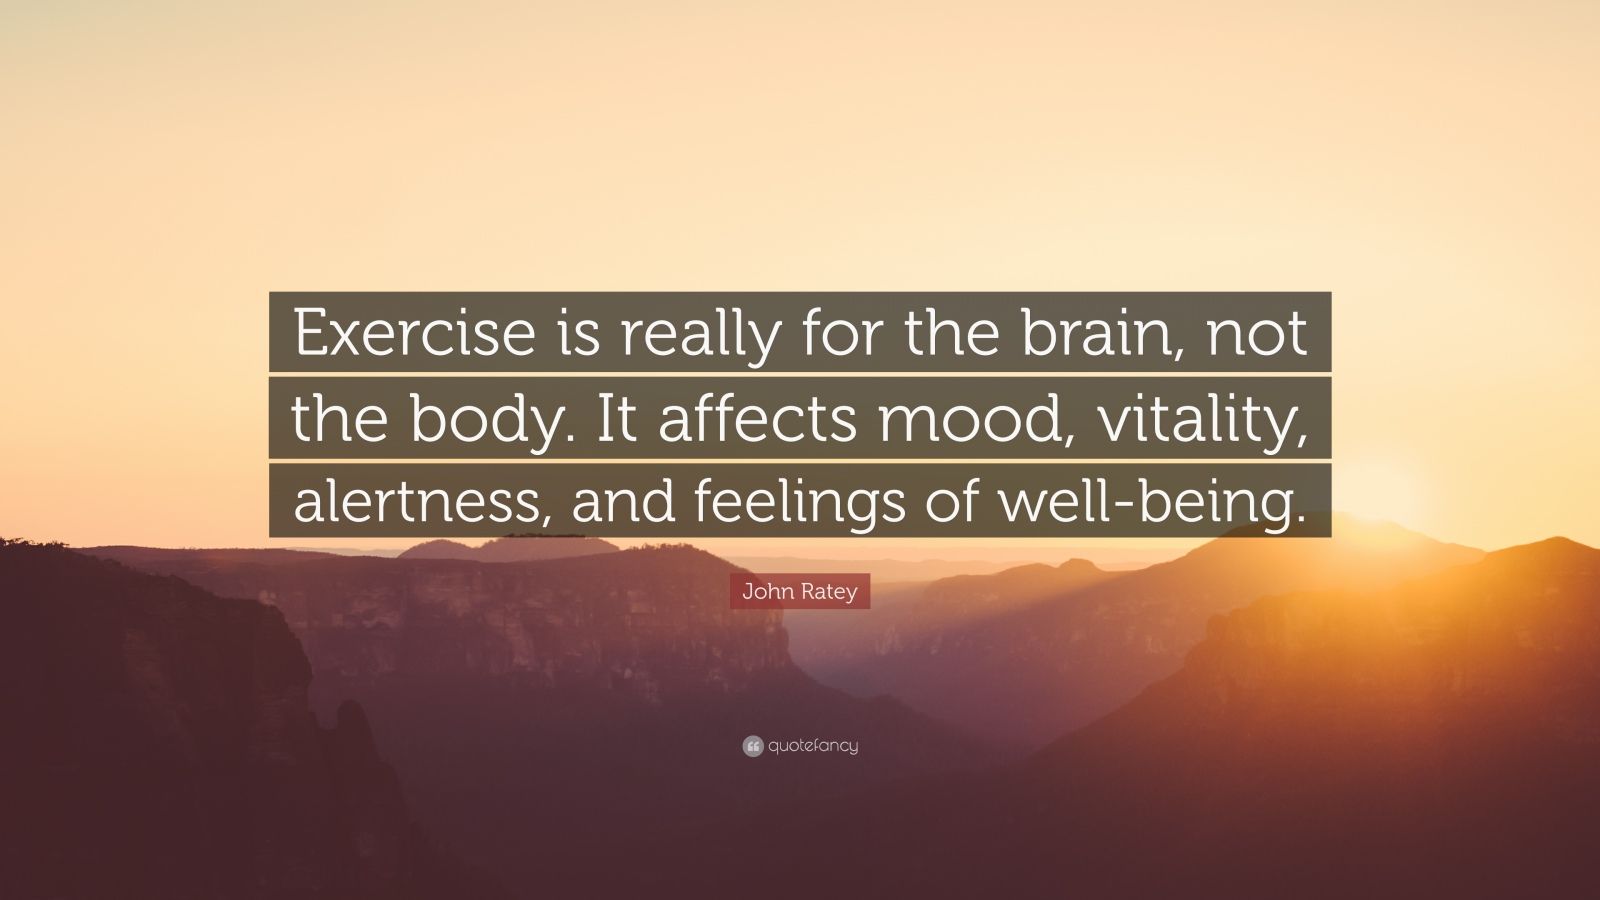 John Ratey Quote: “Exercise is really for the brain, not the body. It